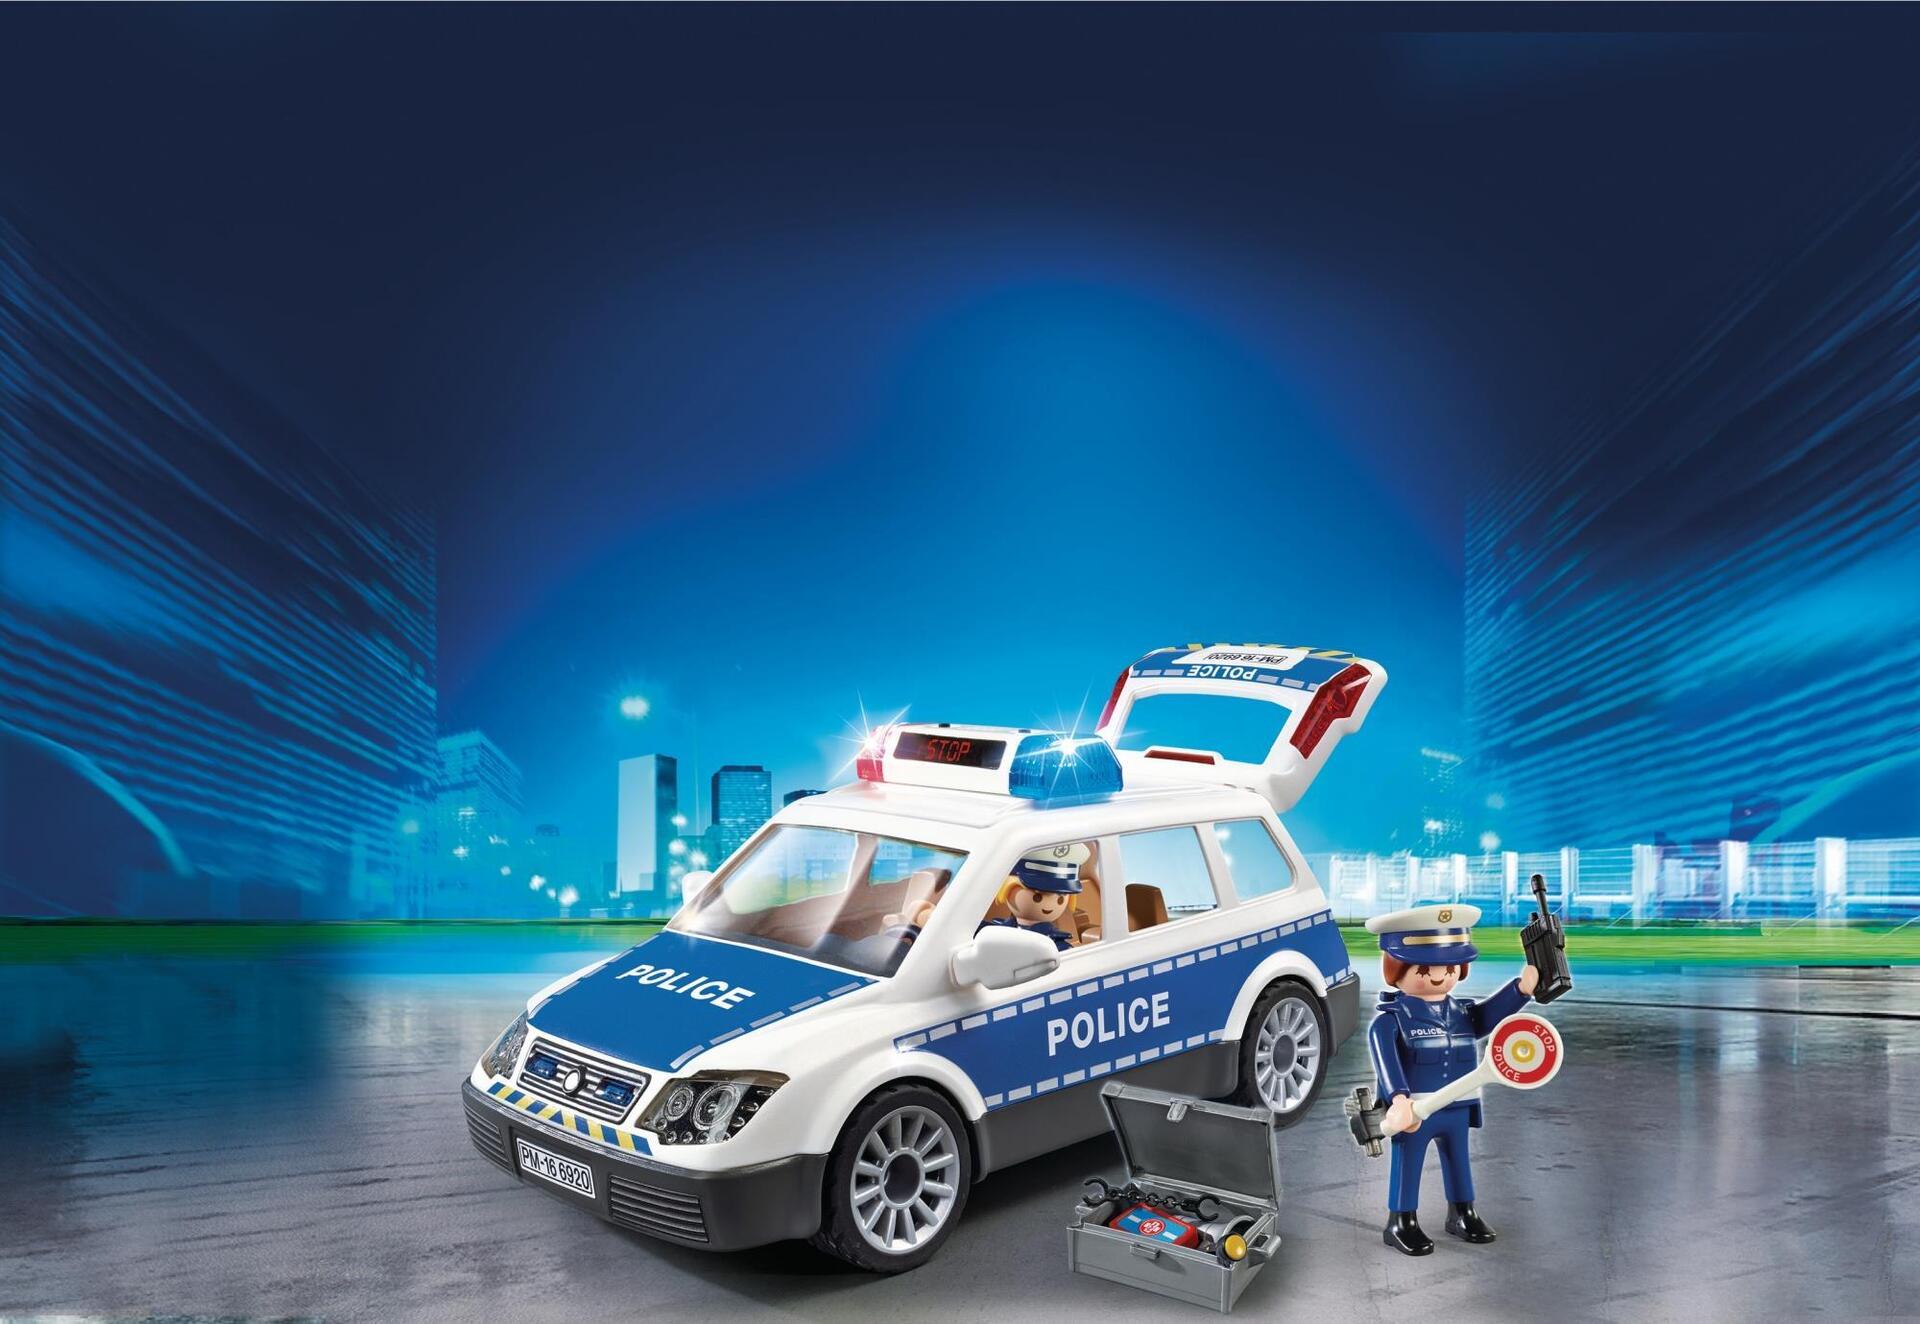 Playmobil Squad Car with Lights and Sound - Aktion/Abenteuer - Junge/Mädchen - 4 Jahr(e) - AAA - Mehrfarbig - Kunststoff (6920)